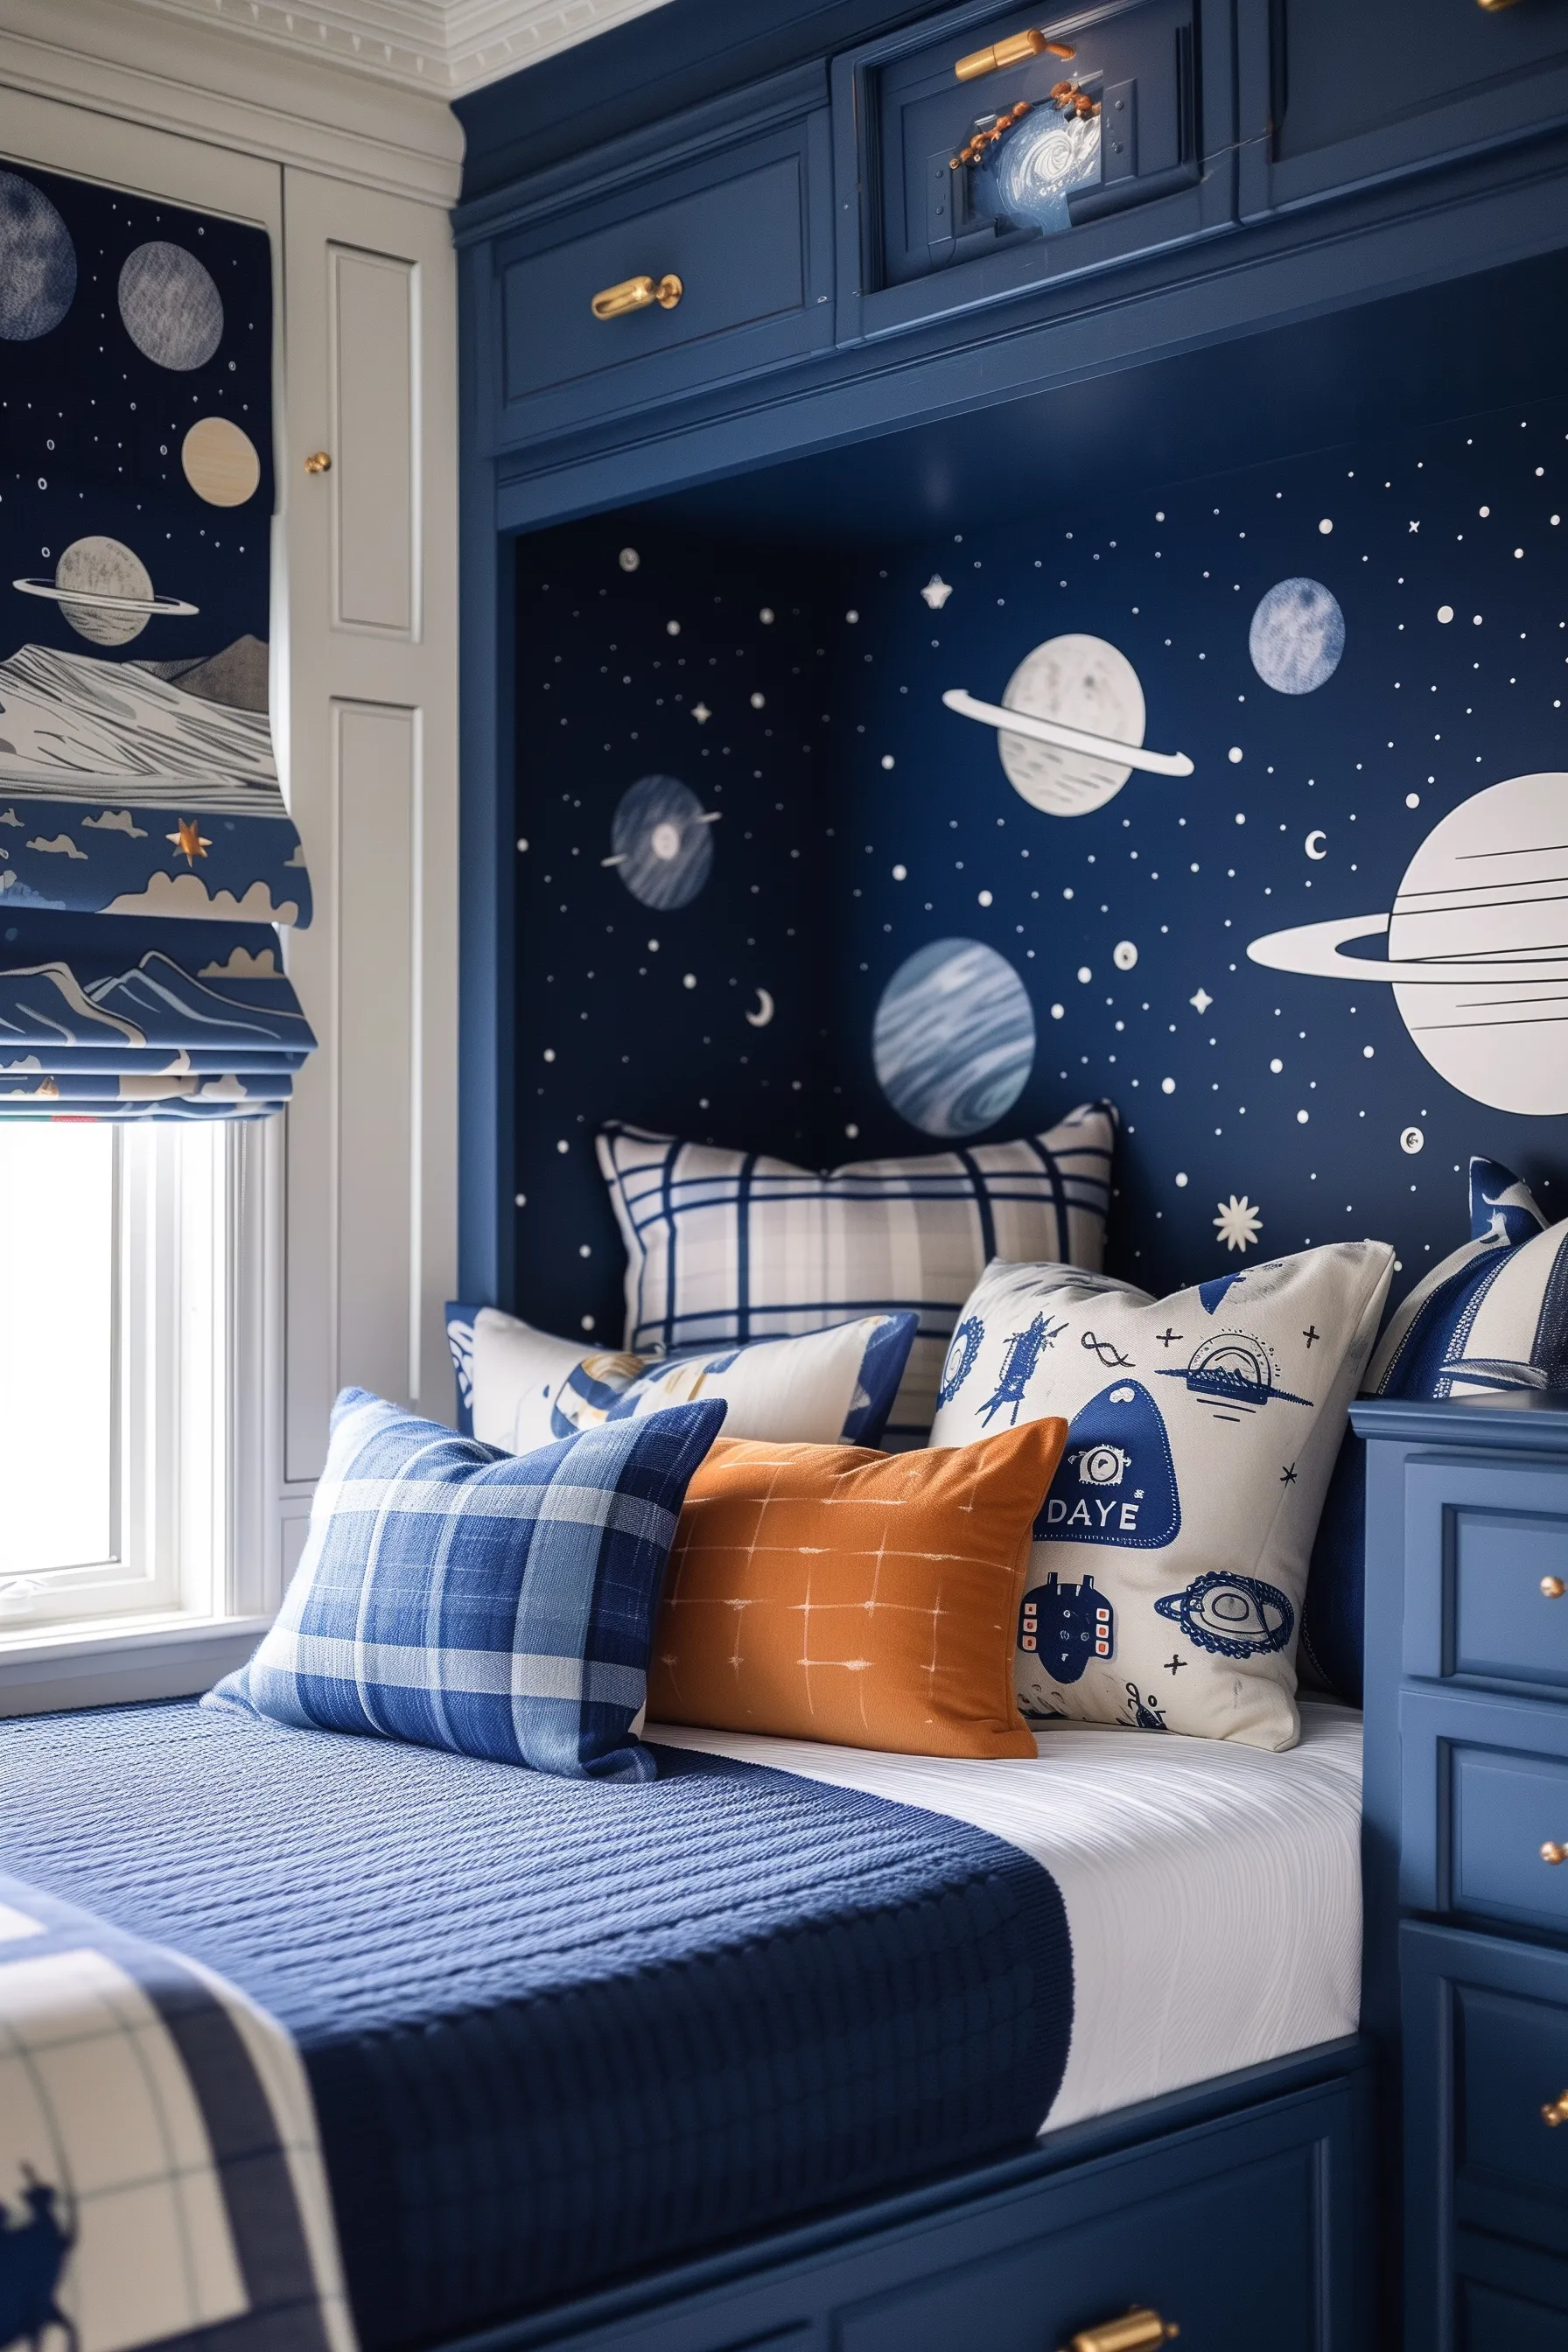 This space themed bedroom represents the true galaxy experience with images of the milky way and universe decorations